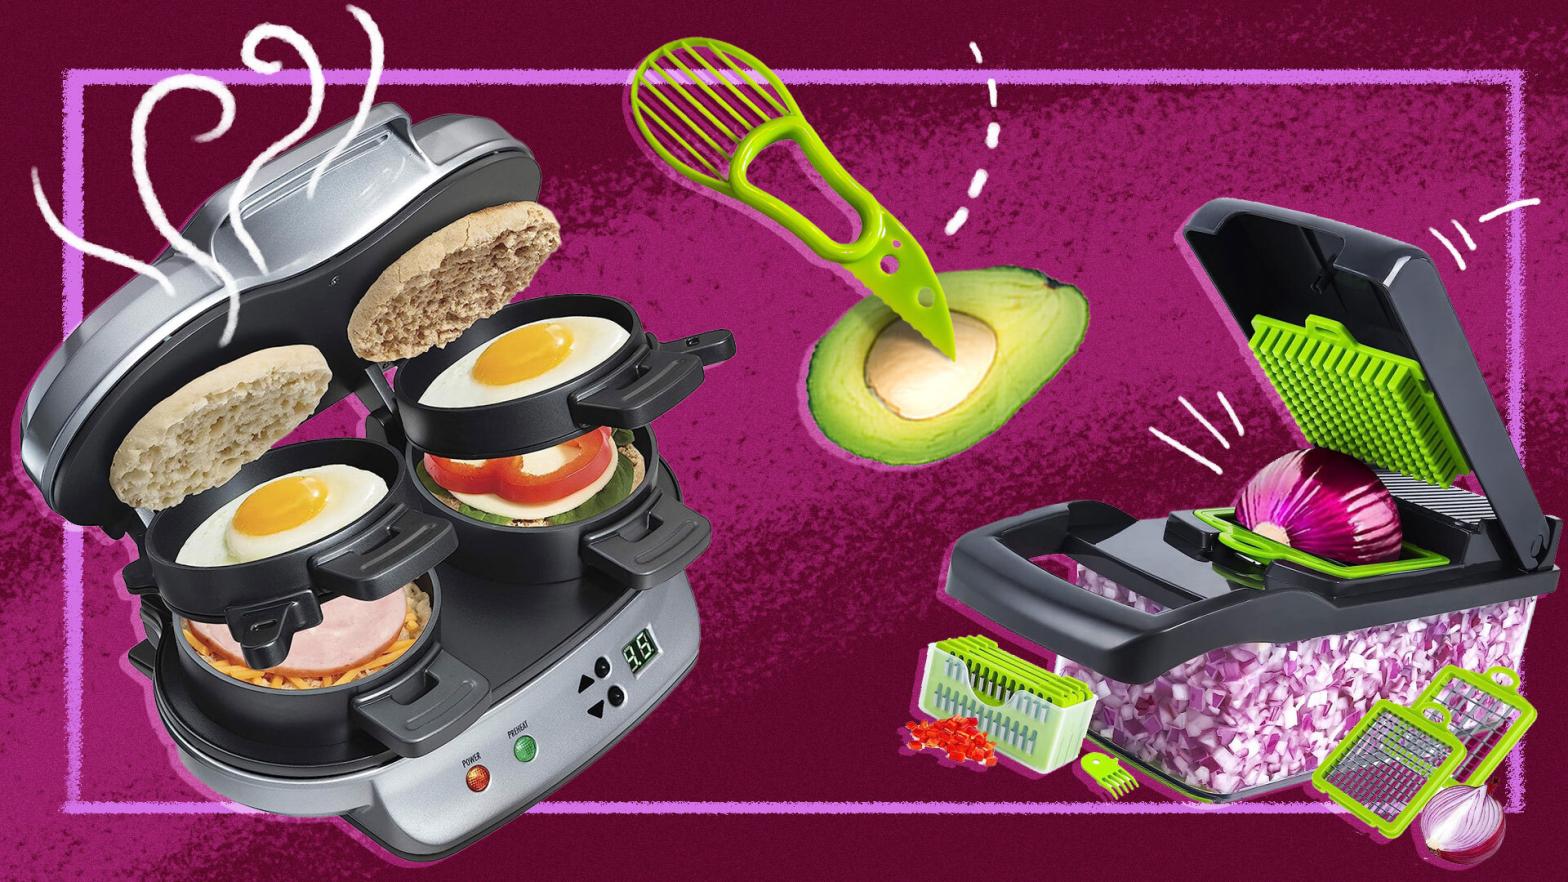 5 Gimmicky Kitchen Appliances You Definitely Don’t Need